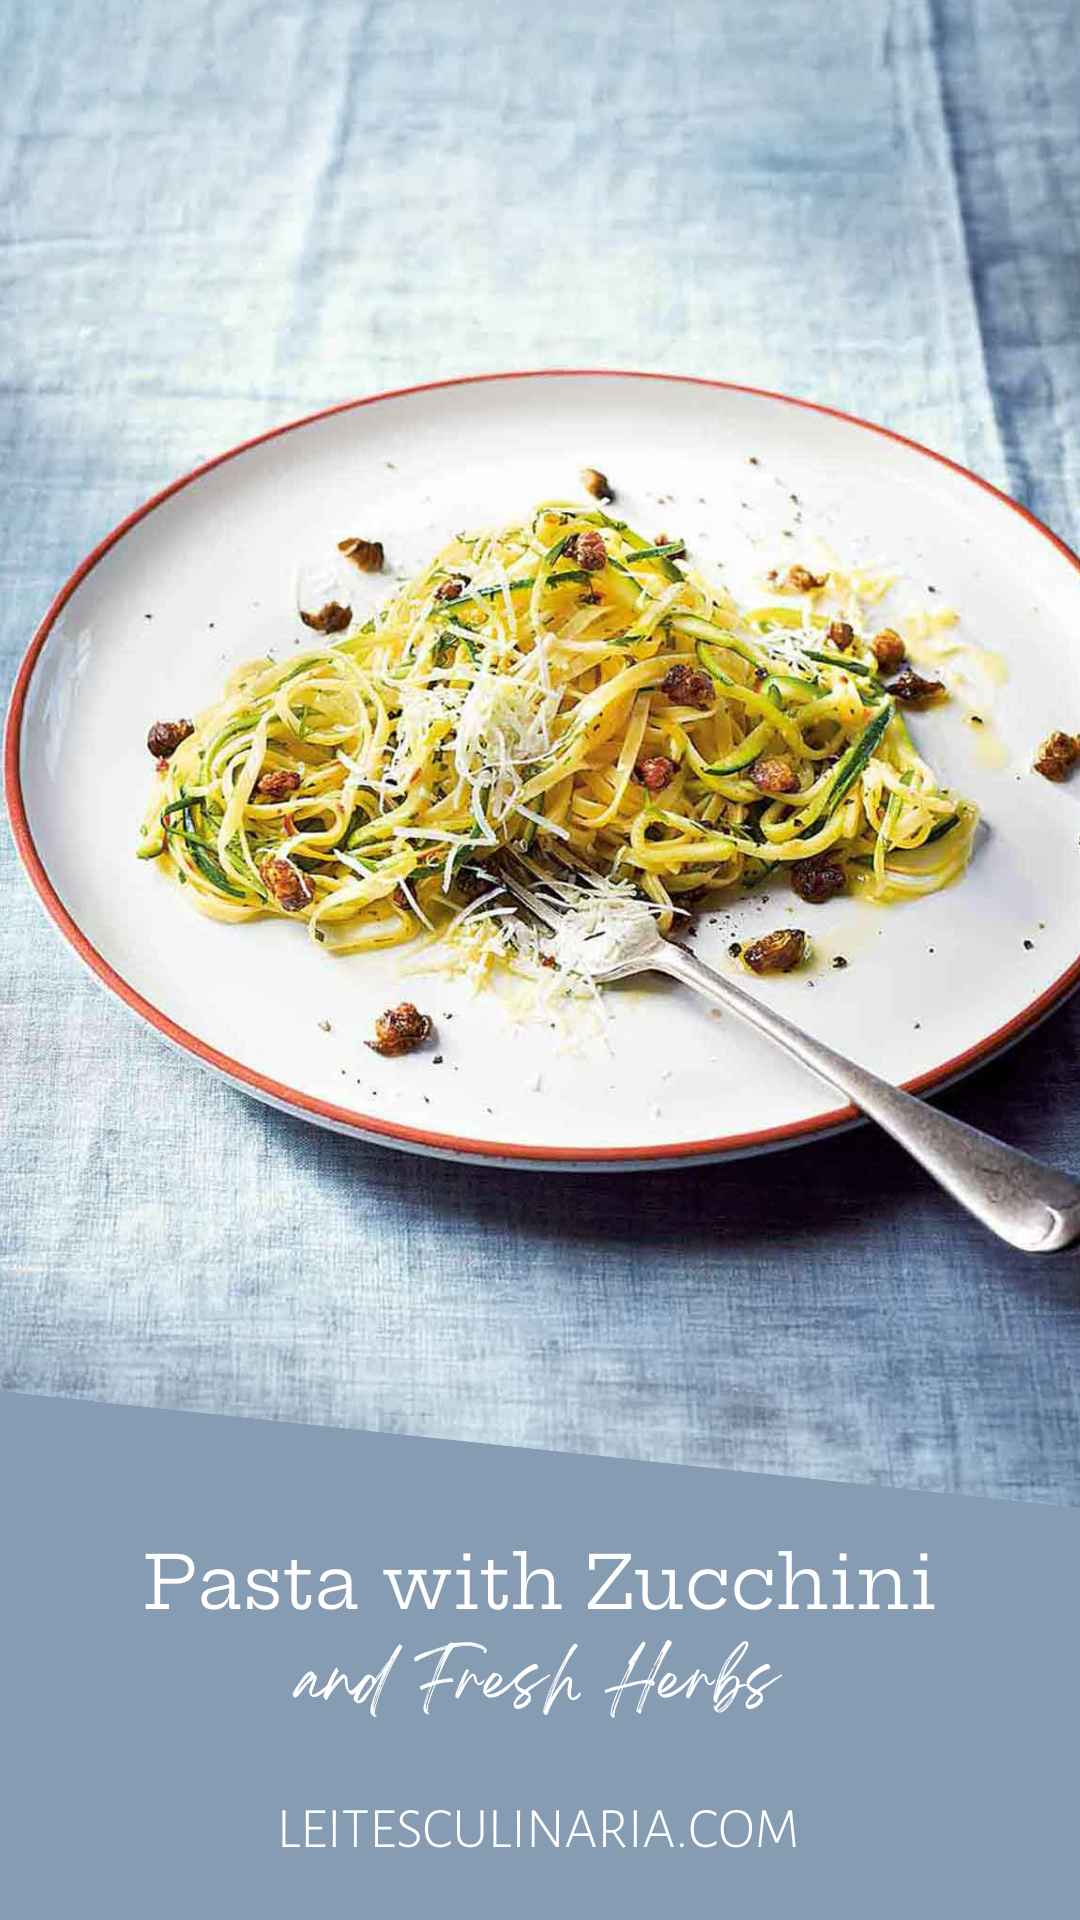 A serving of linguine and spiralized zucchini on a plate with capers and parmesan cheese.